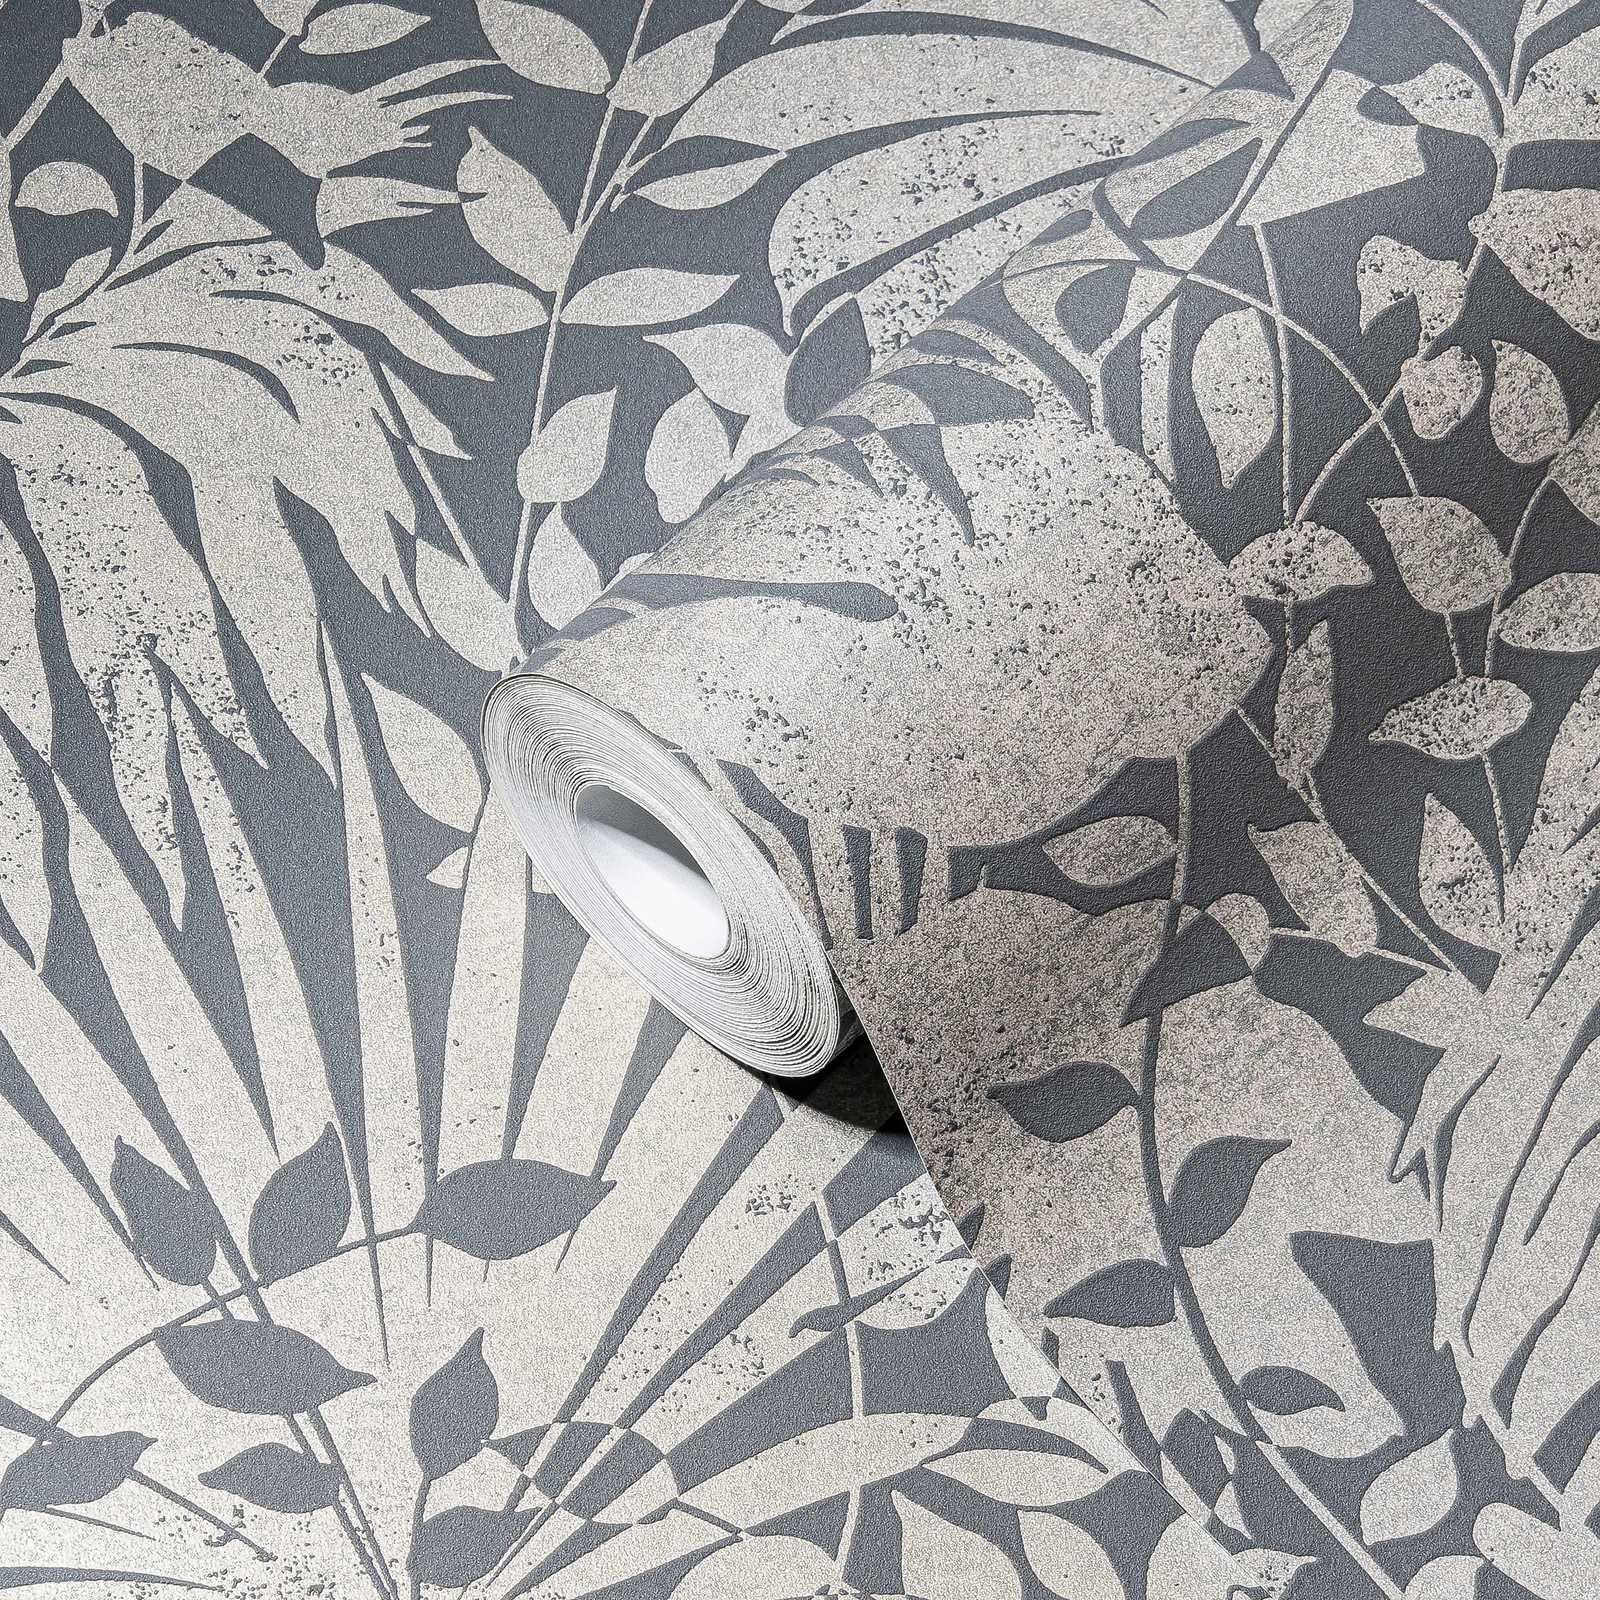             Silver wallpaper with leaves design and texture effect
        